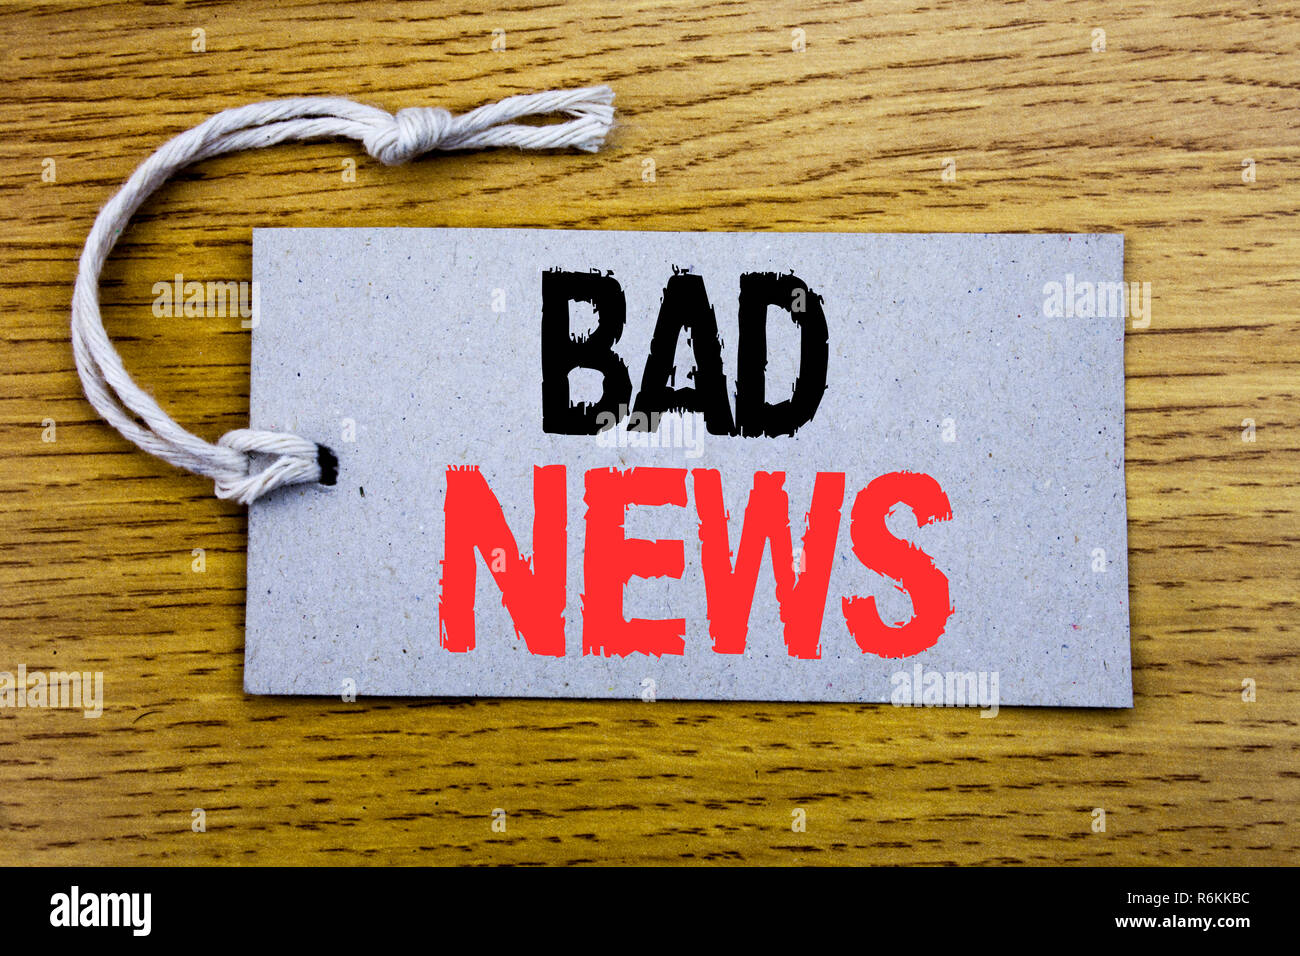 Conceptual hand writing text caption showing Bad News. Business concept for Failure Media Newspaper written on price tag paper with copy space on the wooden vintage background Stock Photo